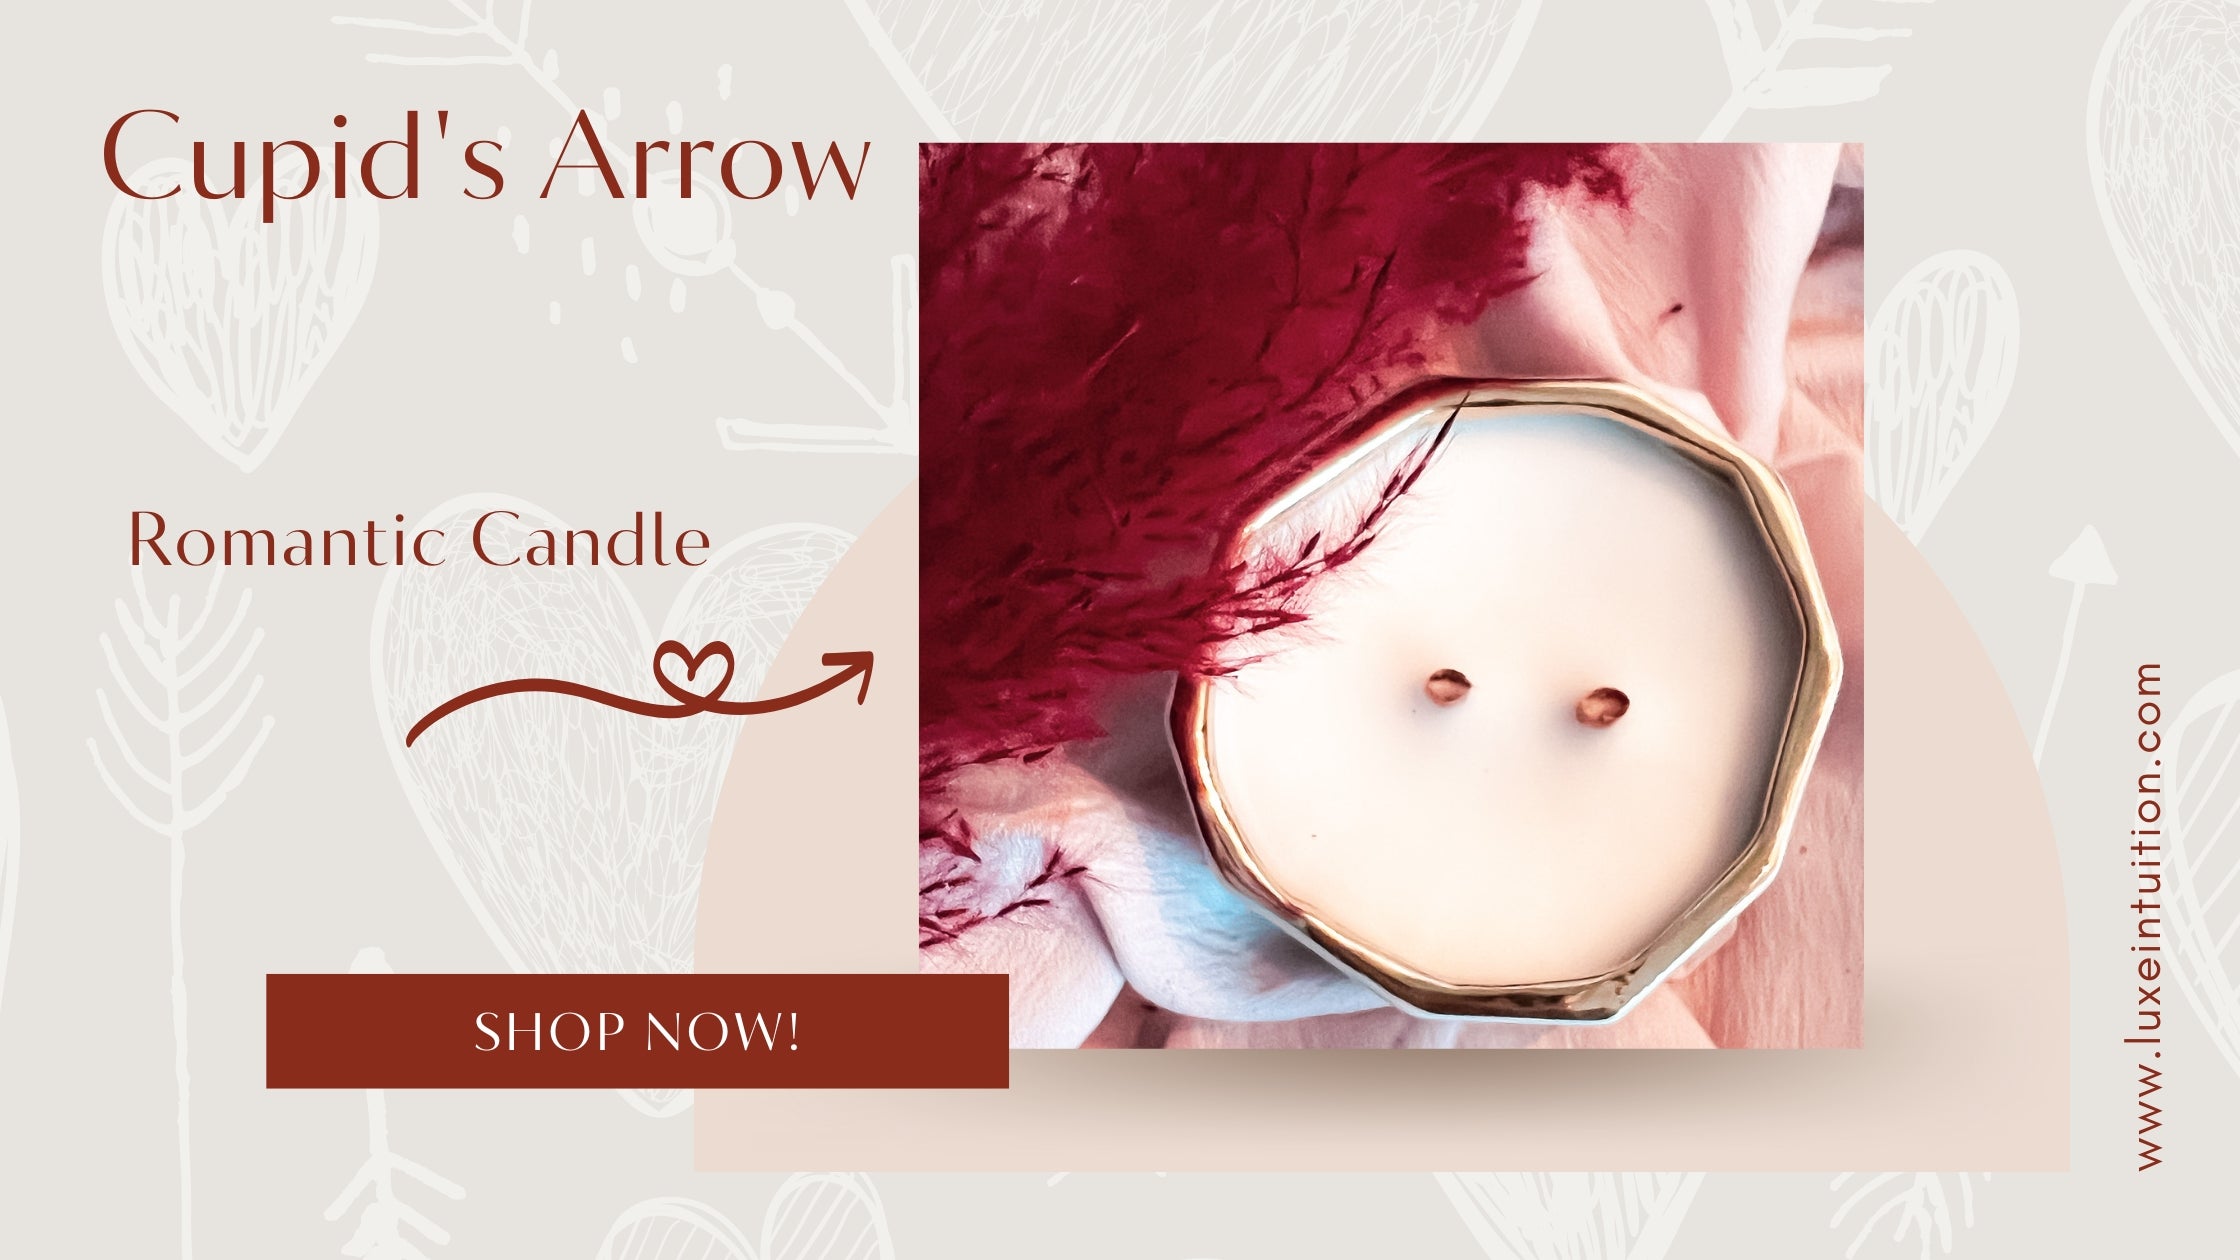 Romantic Candle - Scent is Cupid's Arrow inside a ceramic white candle vessel with metallic gold finish inside.